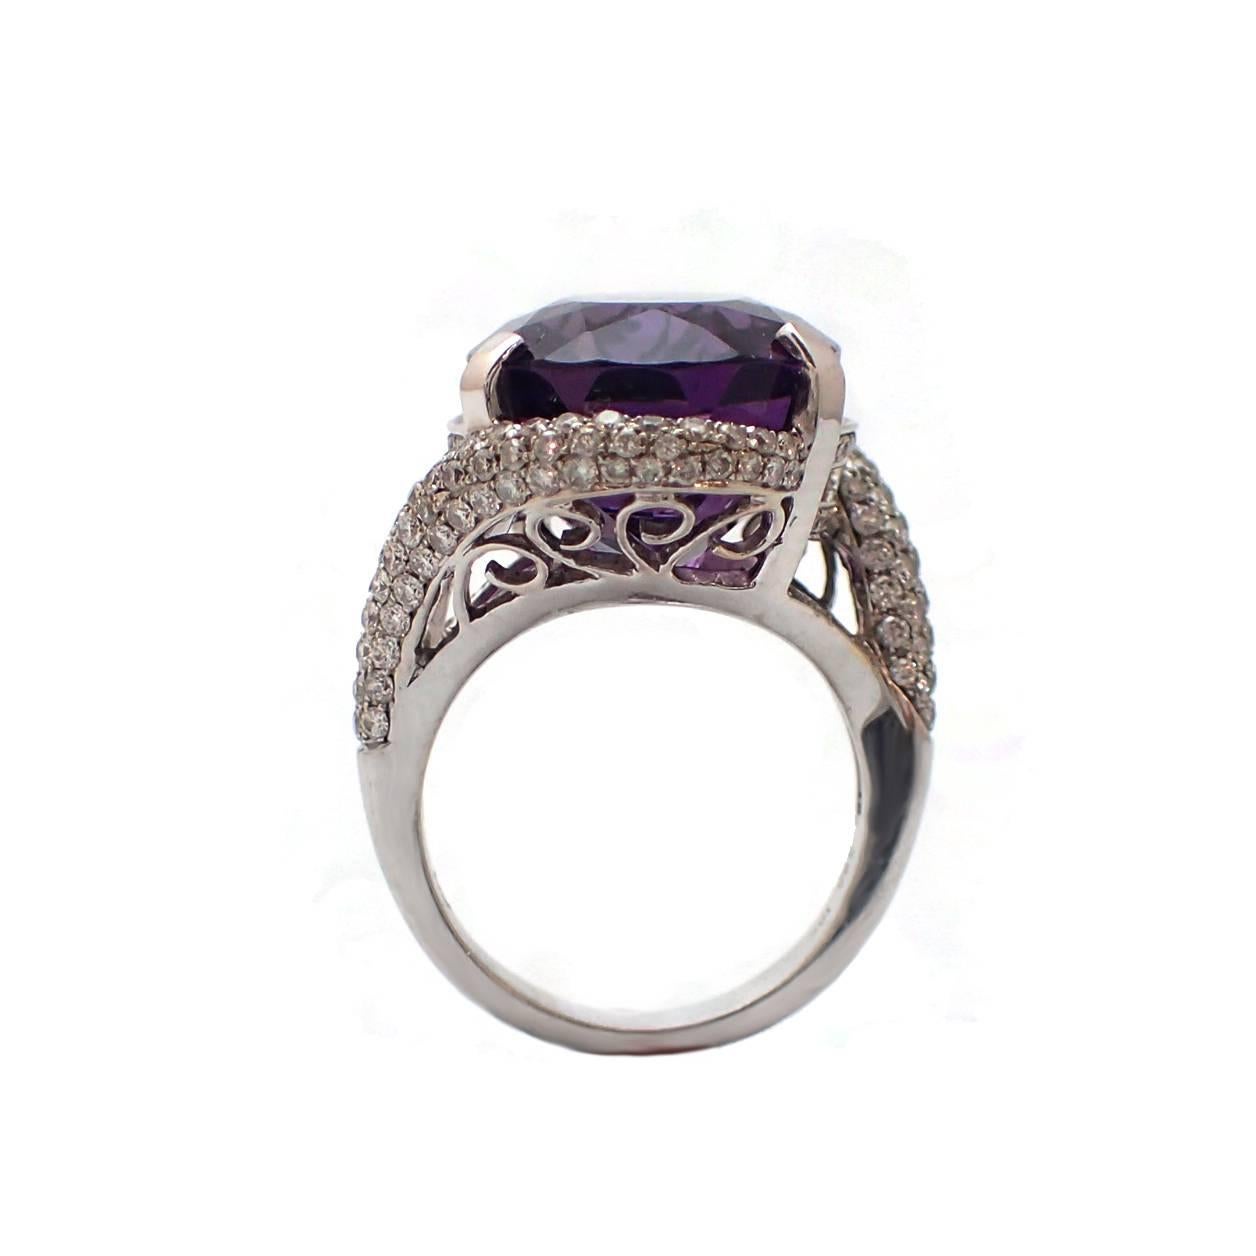 Contemporary 18.13 Carat Oval Amethyst and Diamond Ring in 18 Karat White Gold